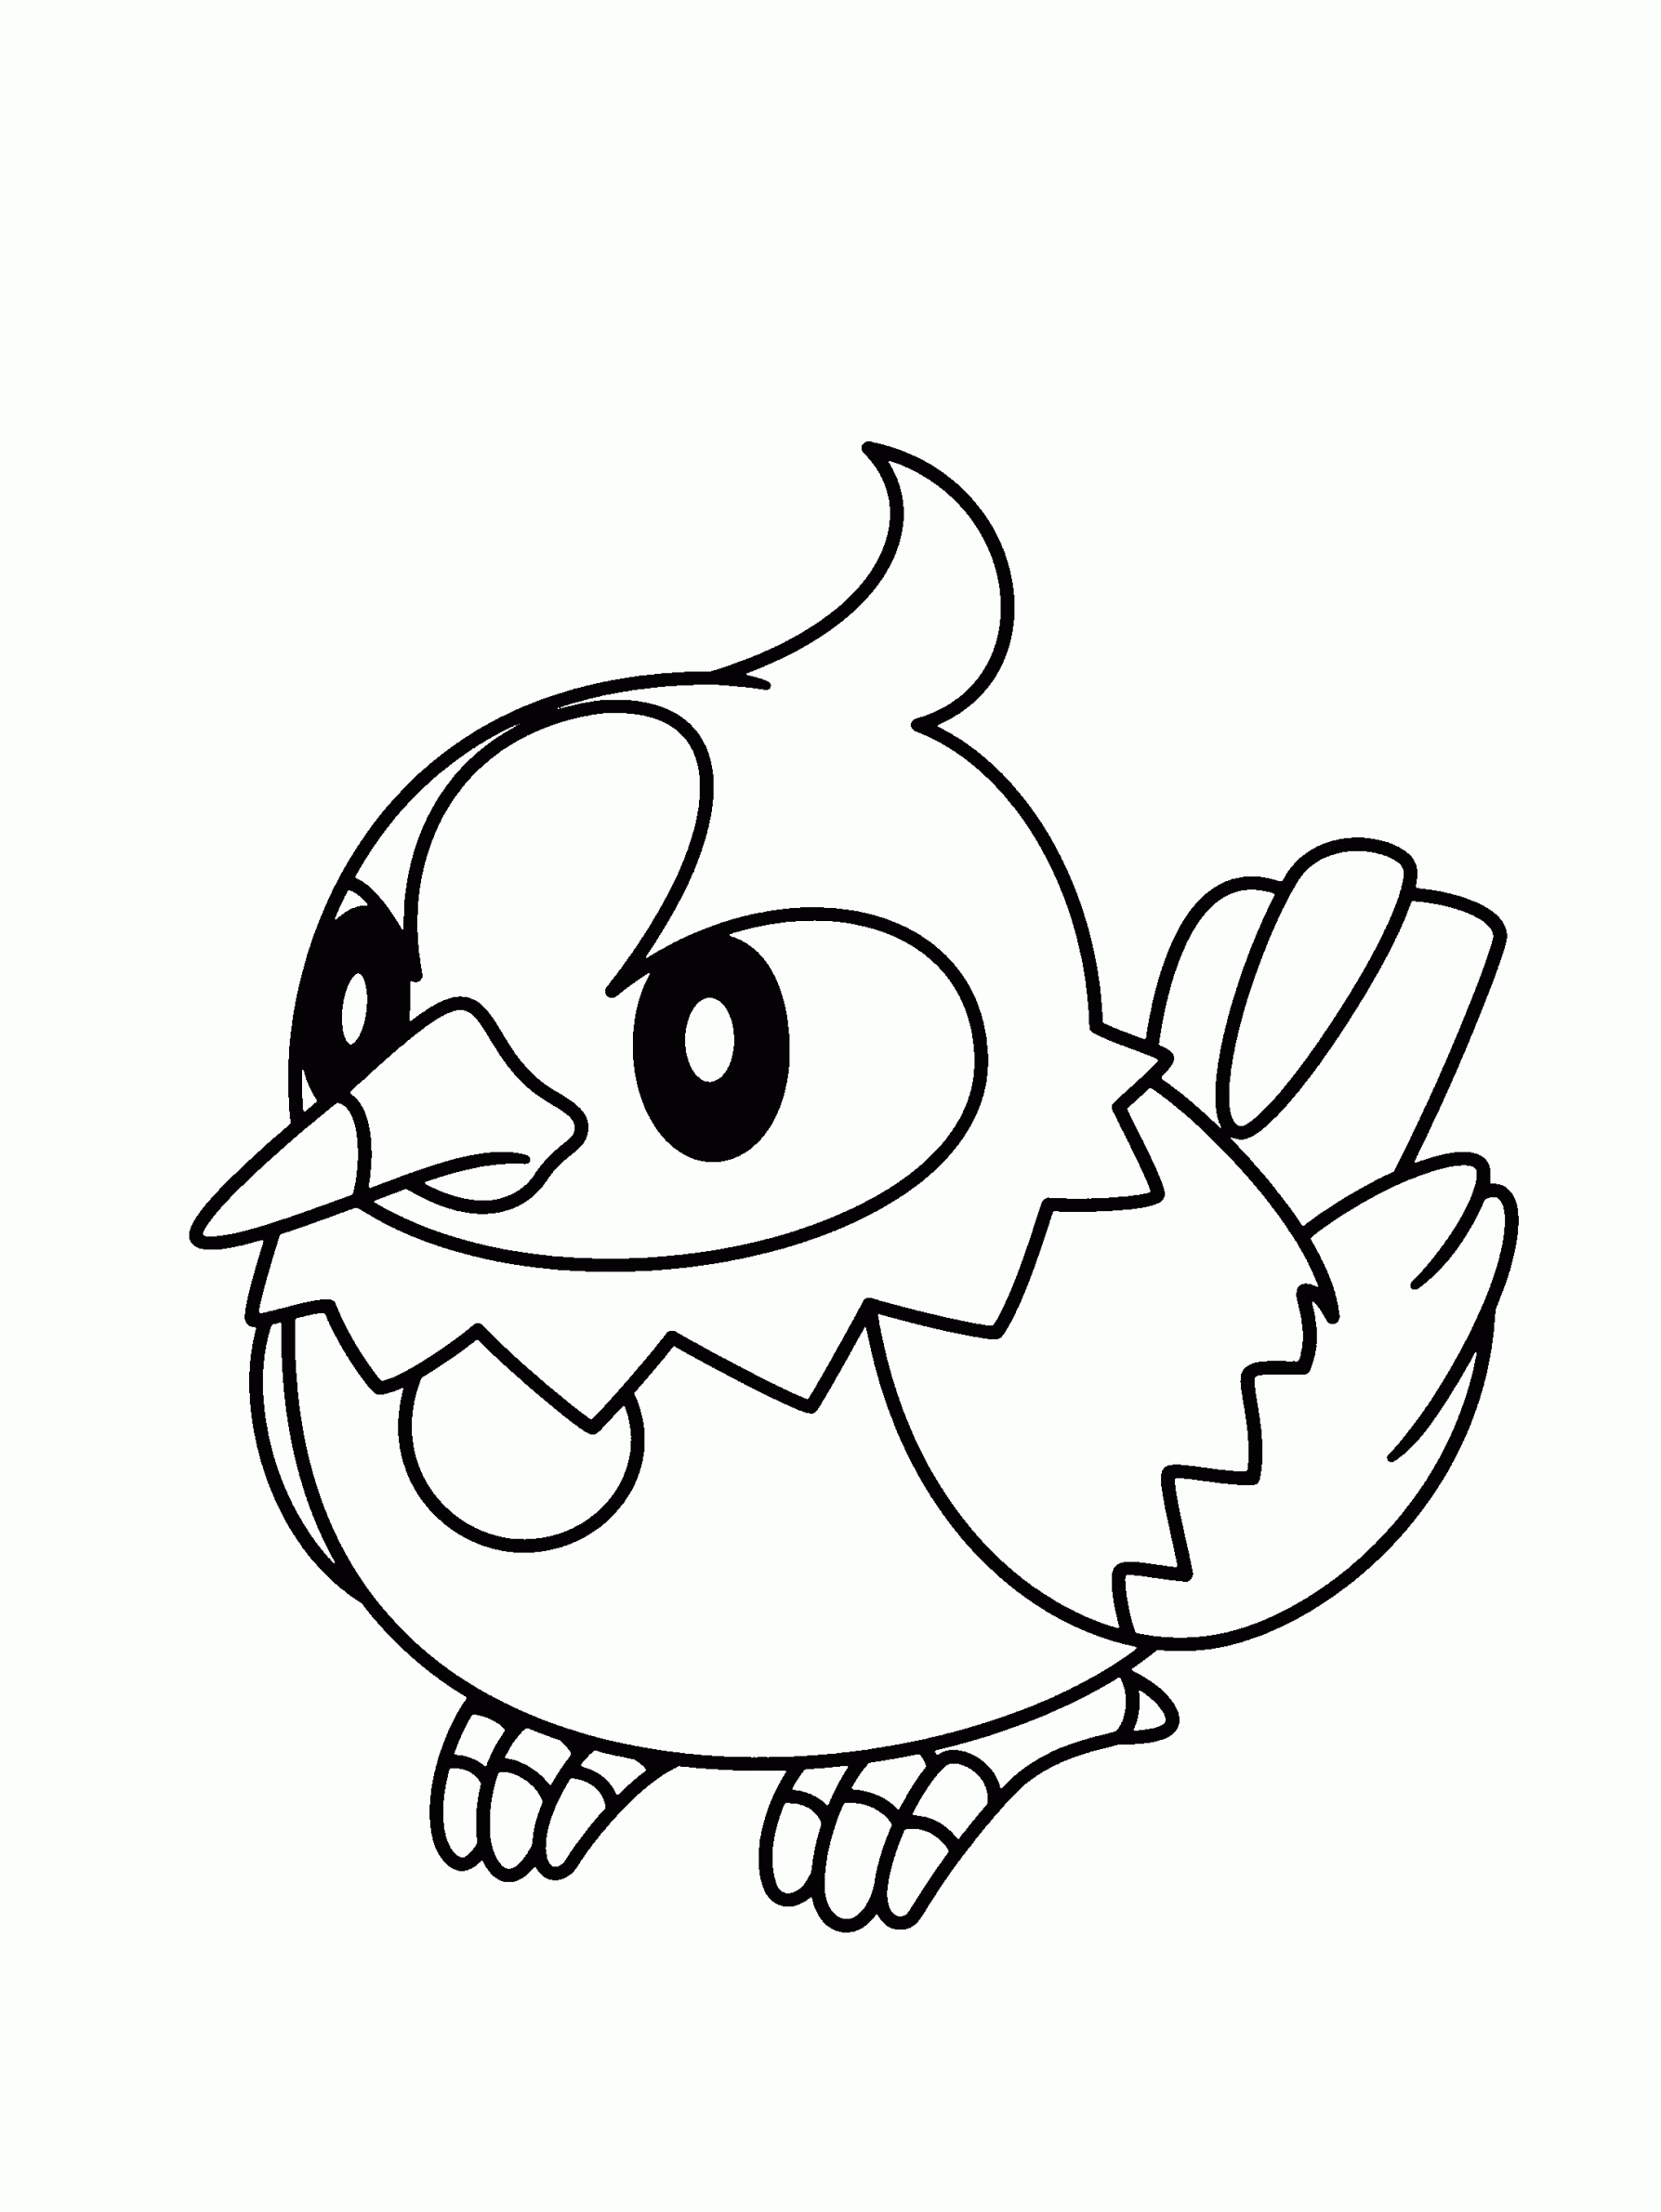 Pokemon Starly coloring pages printable free